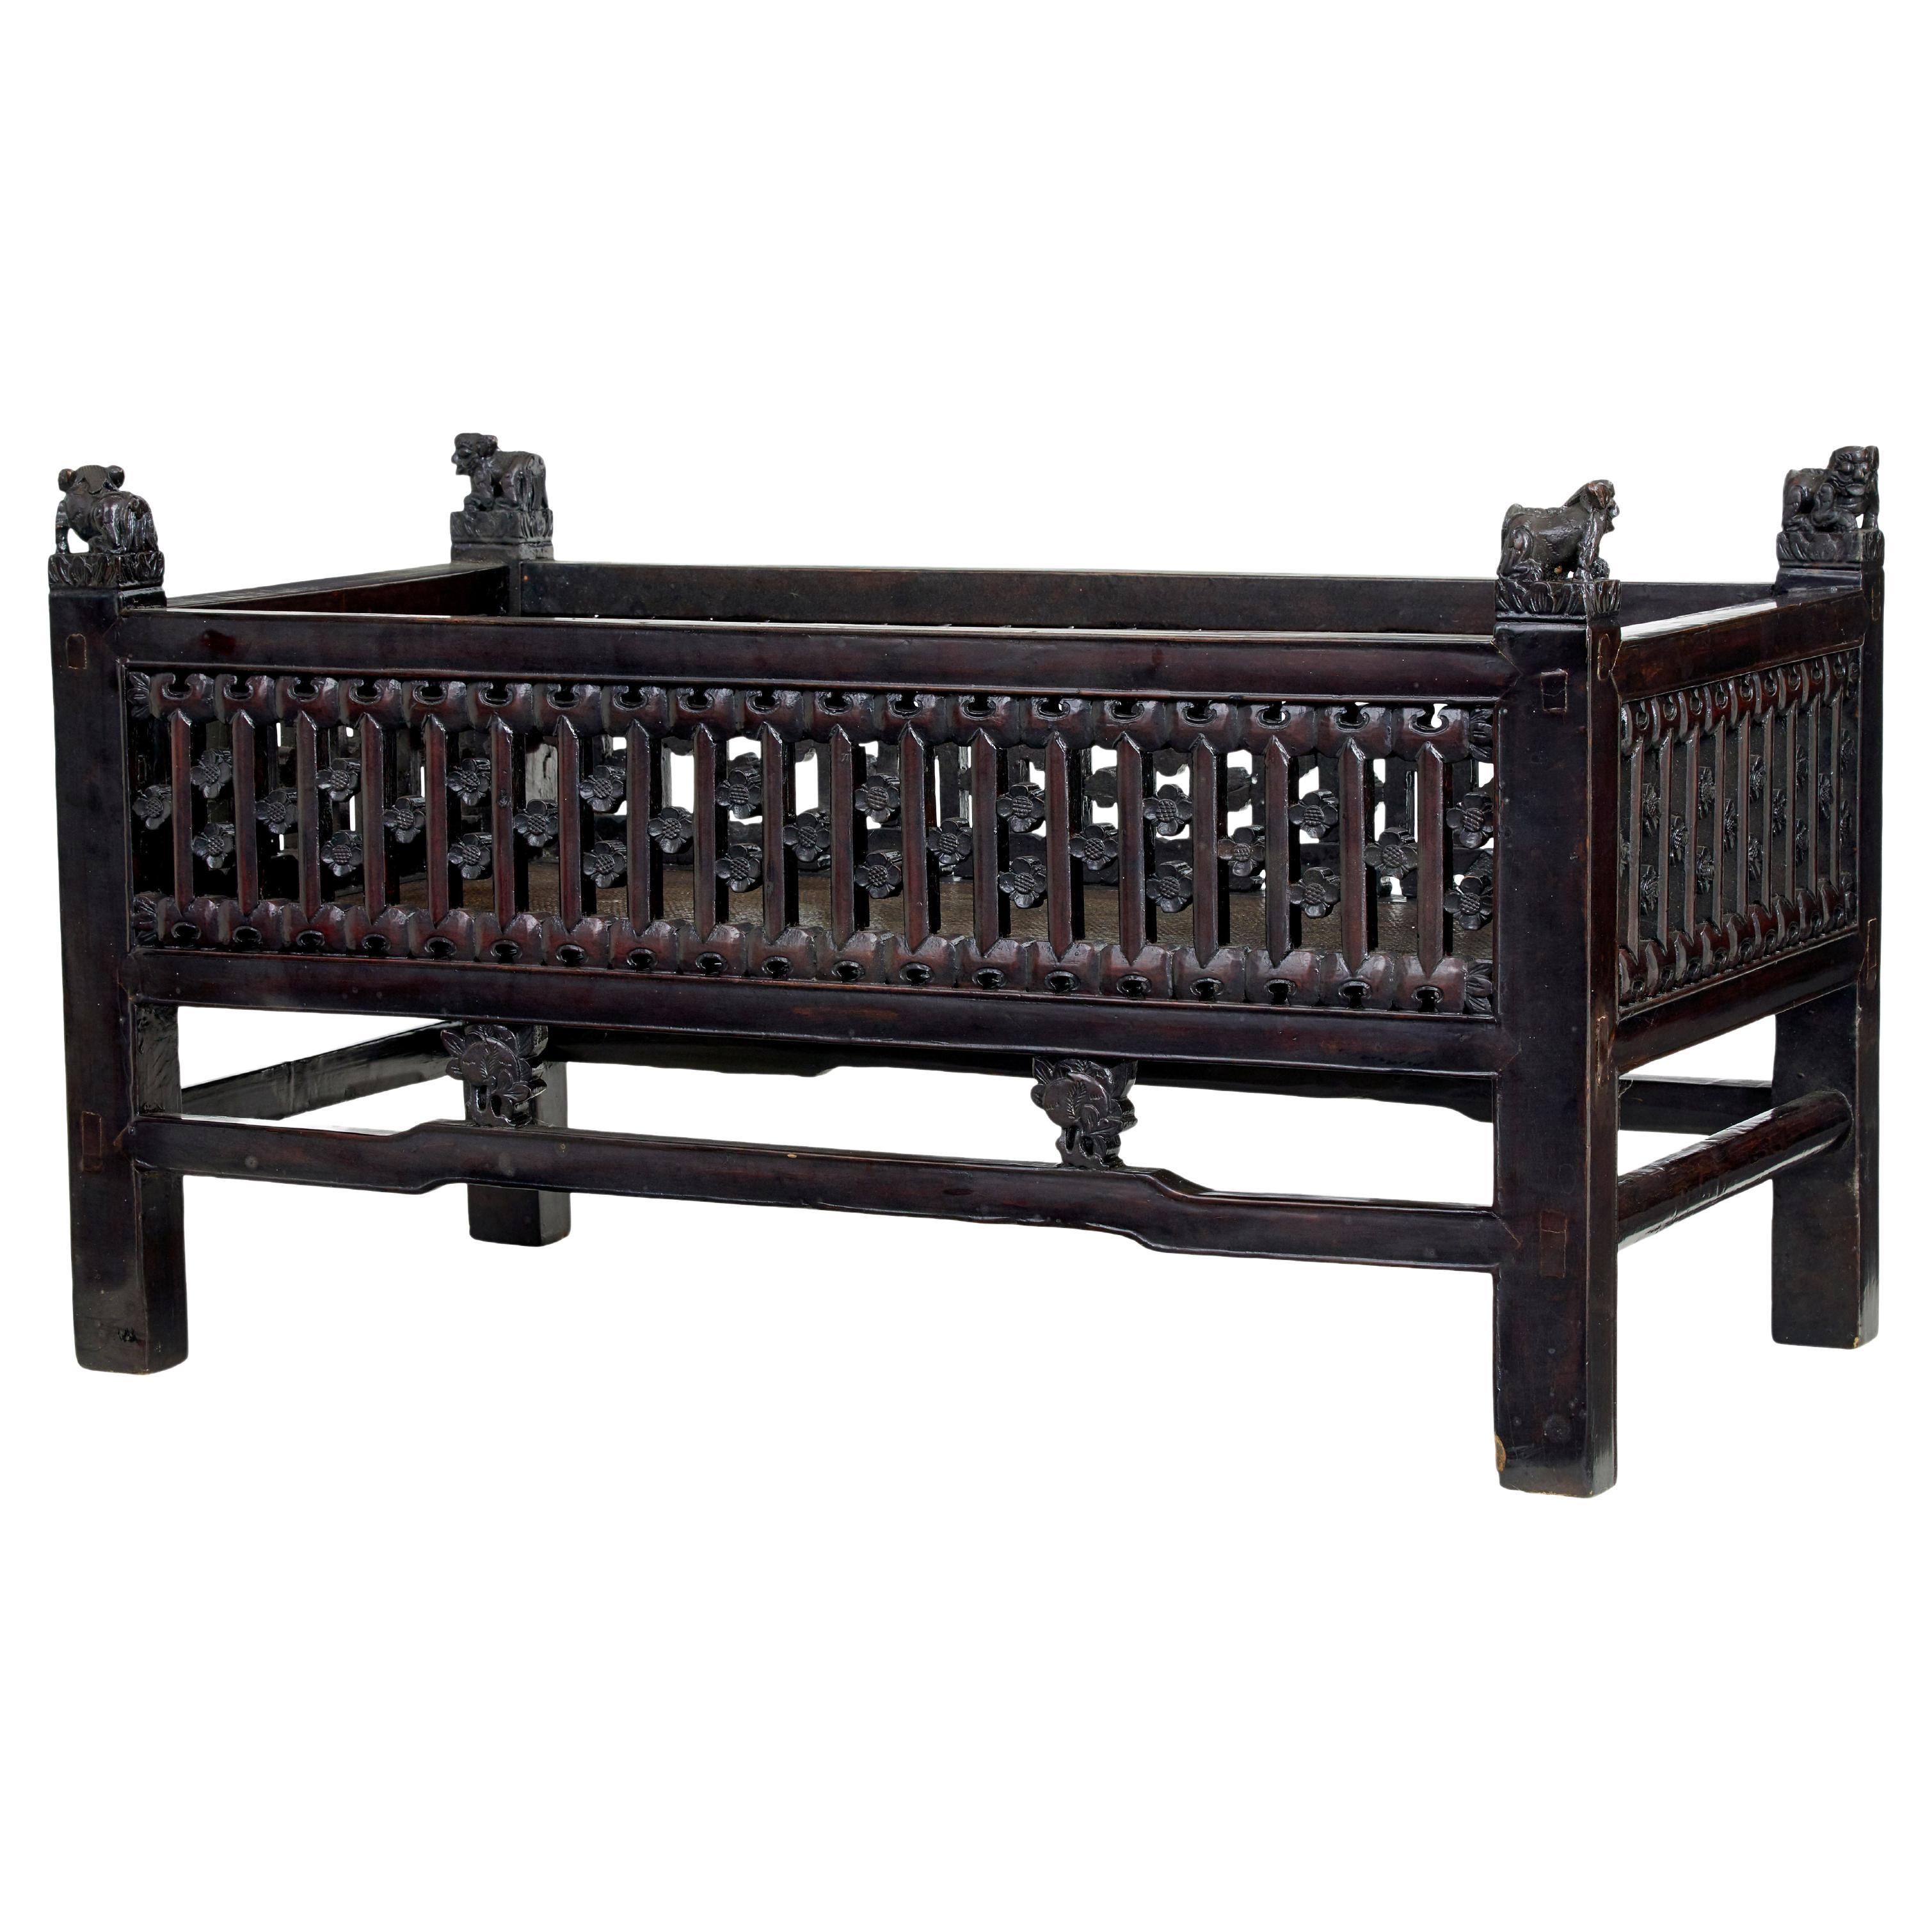 19th century Chinese lacquered child's bed For Sale